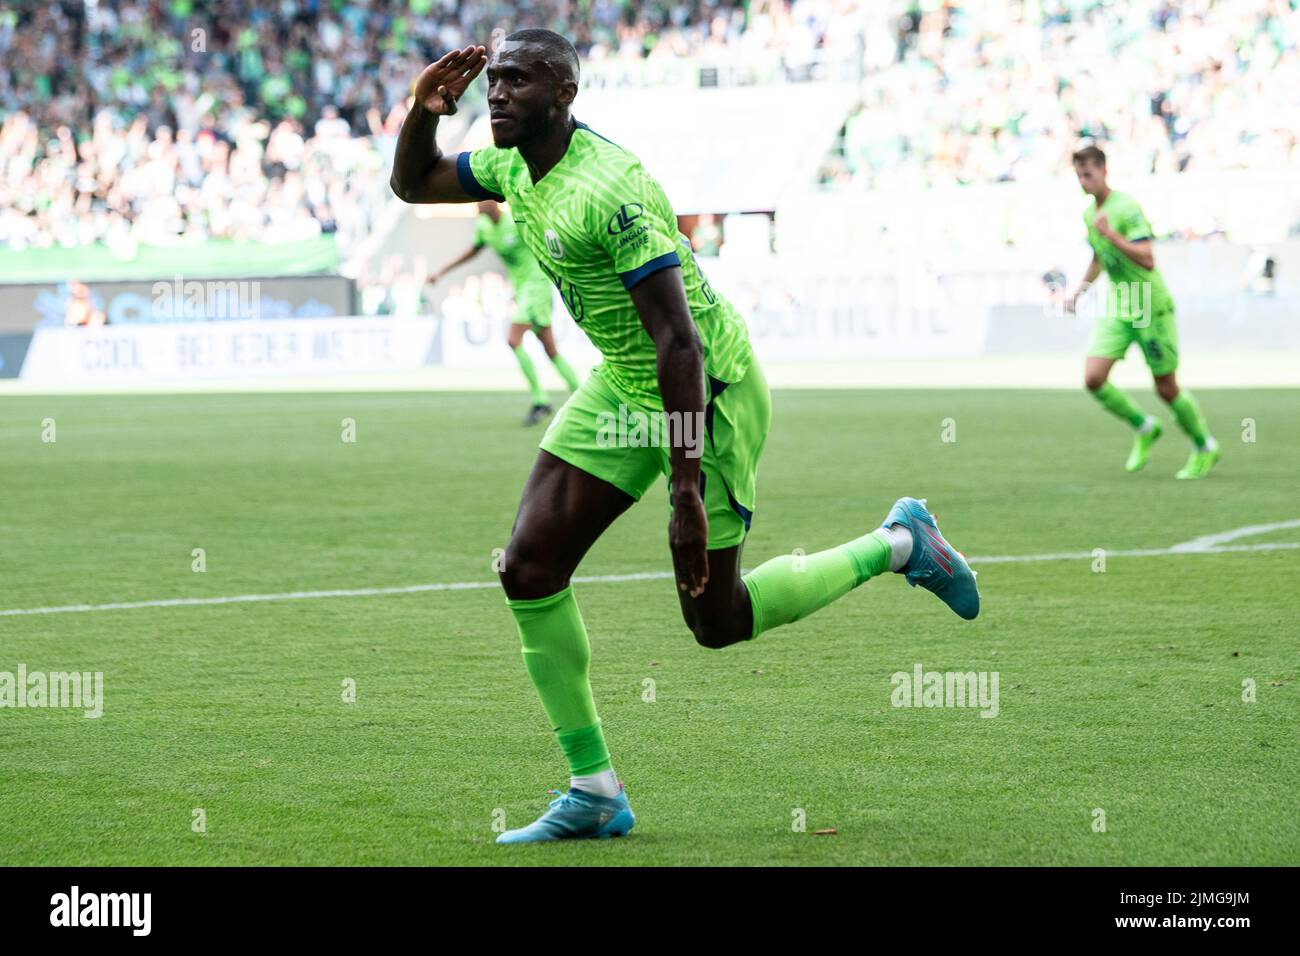 Wolfsburg, Germany. 06th Aug, 2022. Soccer, Bundesliga, VfL Wolfsburg - SV Werder Bremen, Matchday 1, Volkswagen Arena. Wolfsburg's Josuha Guilavogui celebrates after his goal to make it 2:2. Credit: Swen Pförtner/dpa - IMPORTANT NOTE: In accordance with the requirements of the DFL Deutsche Fußball Liga and the DFB Deutscher Fußball-Bund, it is prohibited to use or have used photographs taken in the stadium and/or of the match in the form of sequence pictures and/or video-like photo series./dpa/Alamy Live News Stock Photo